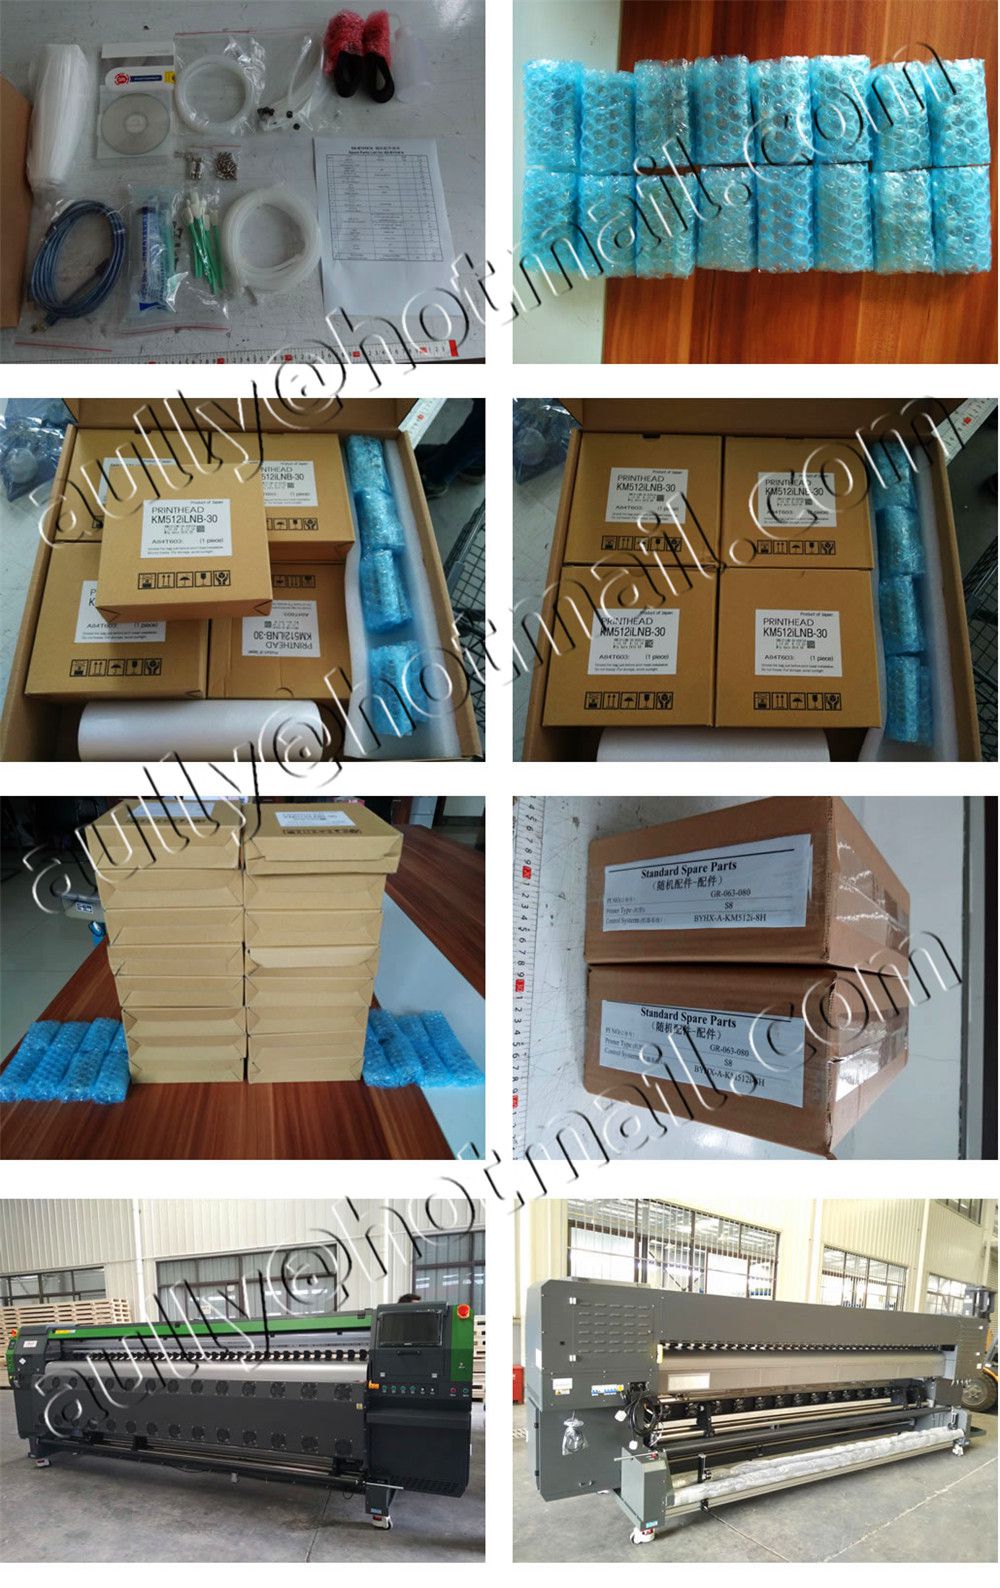 AS161014MX (2 Sets of SK512i Konica Printer with 8PCS KM512i/30pl heads) to Mexico